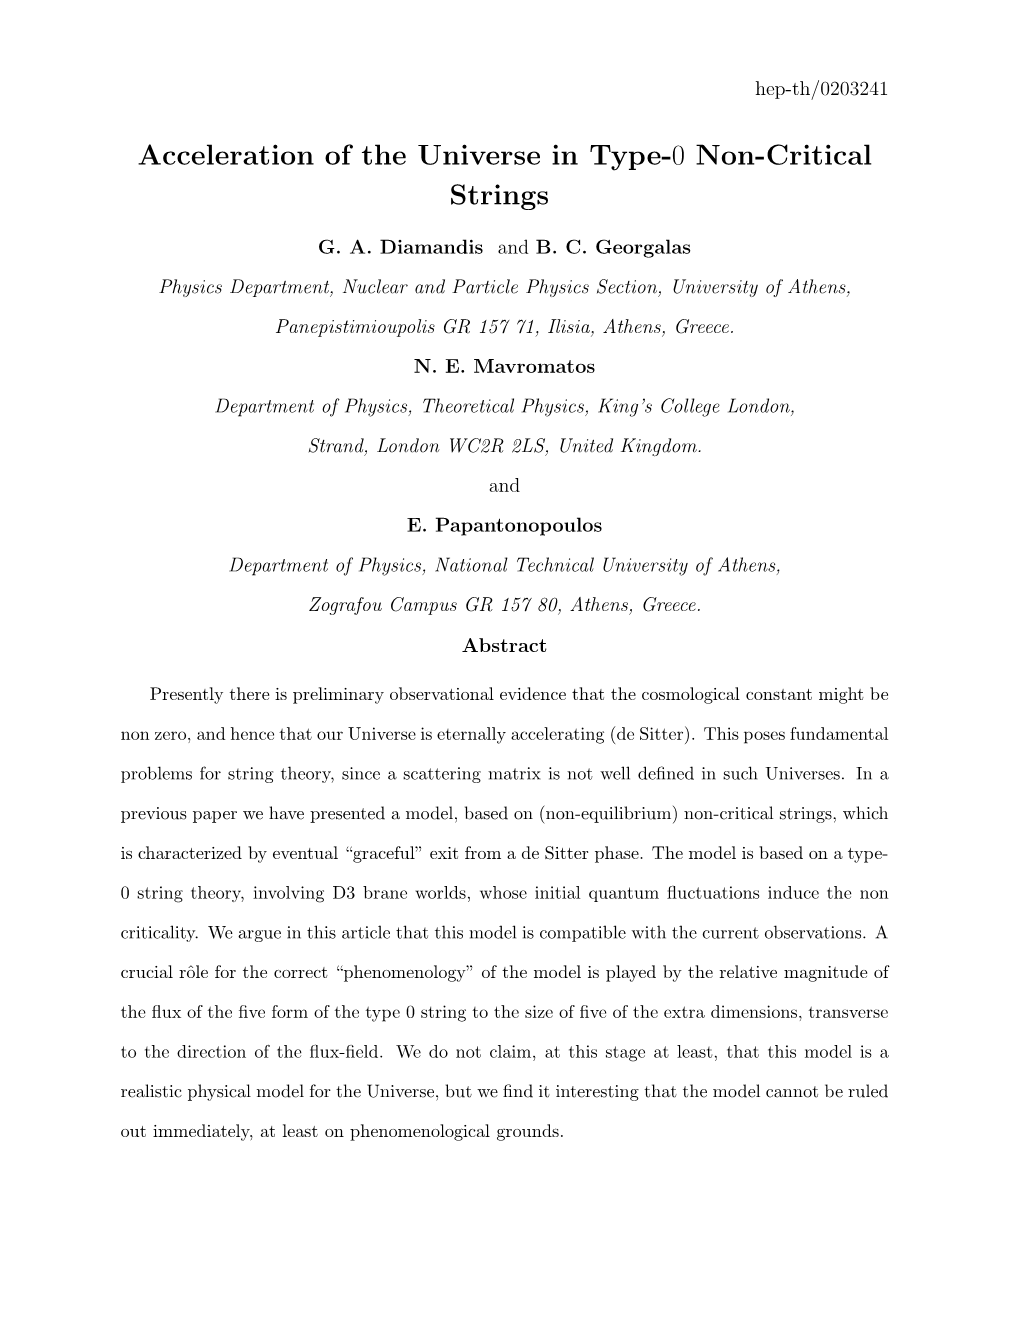 Acceleration of the Universe in Type-0 Non-Critical Strings